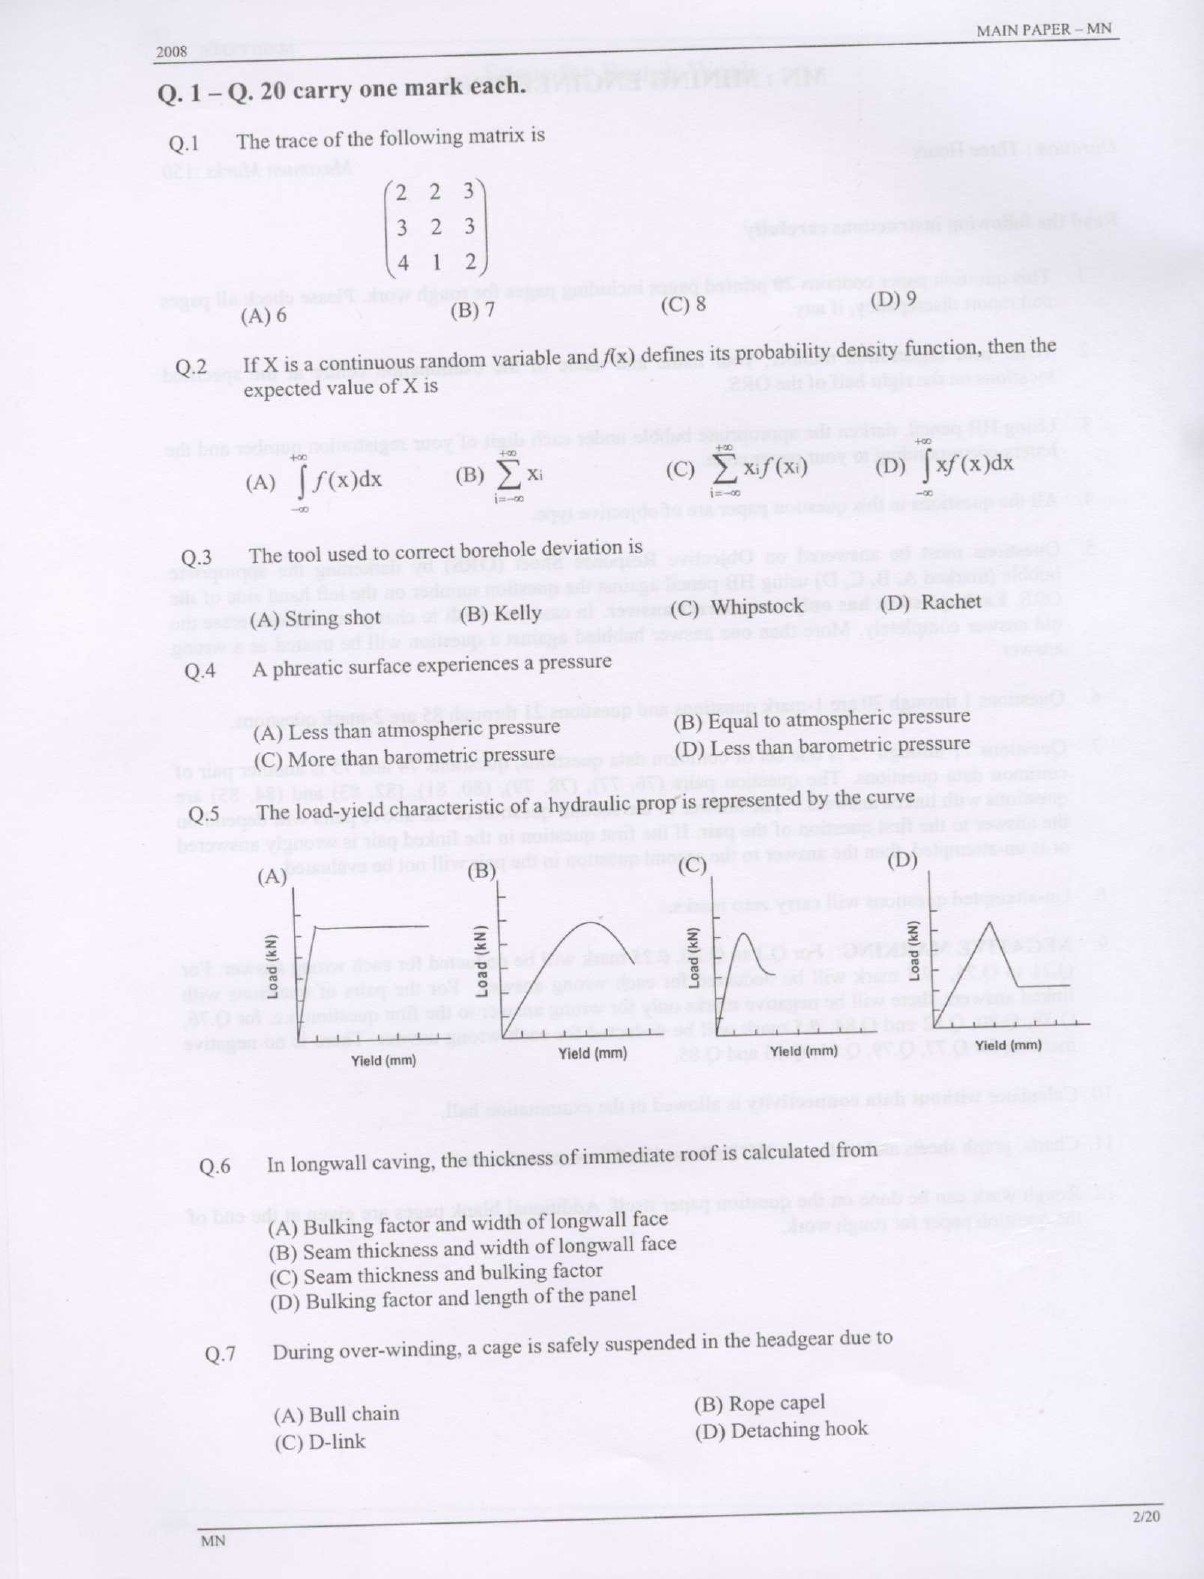 GATE Exam Question Paper 2008 Mining Engineering 2